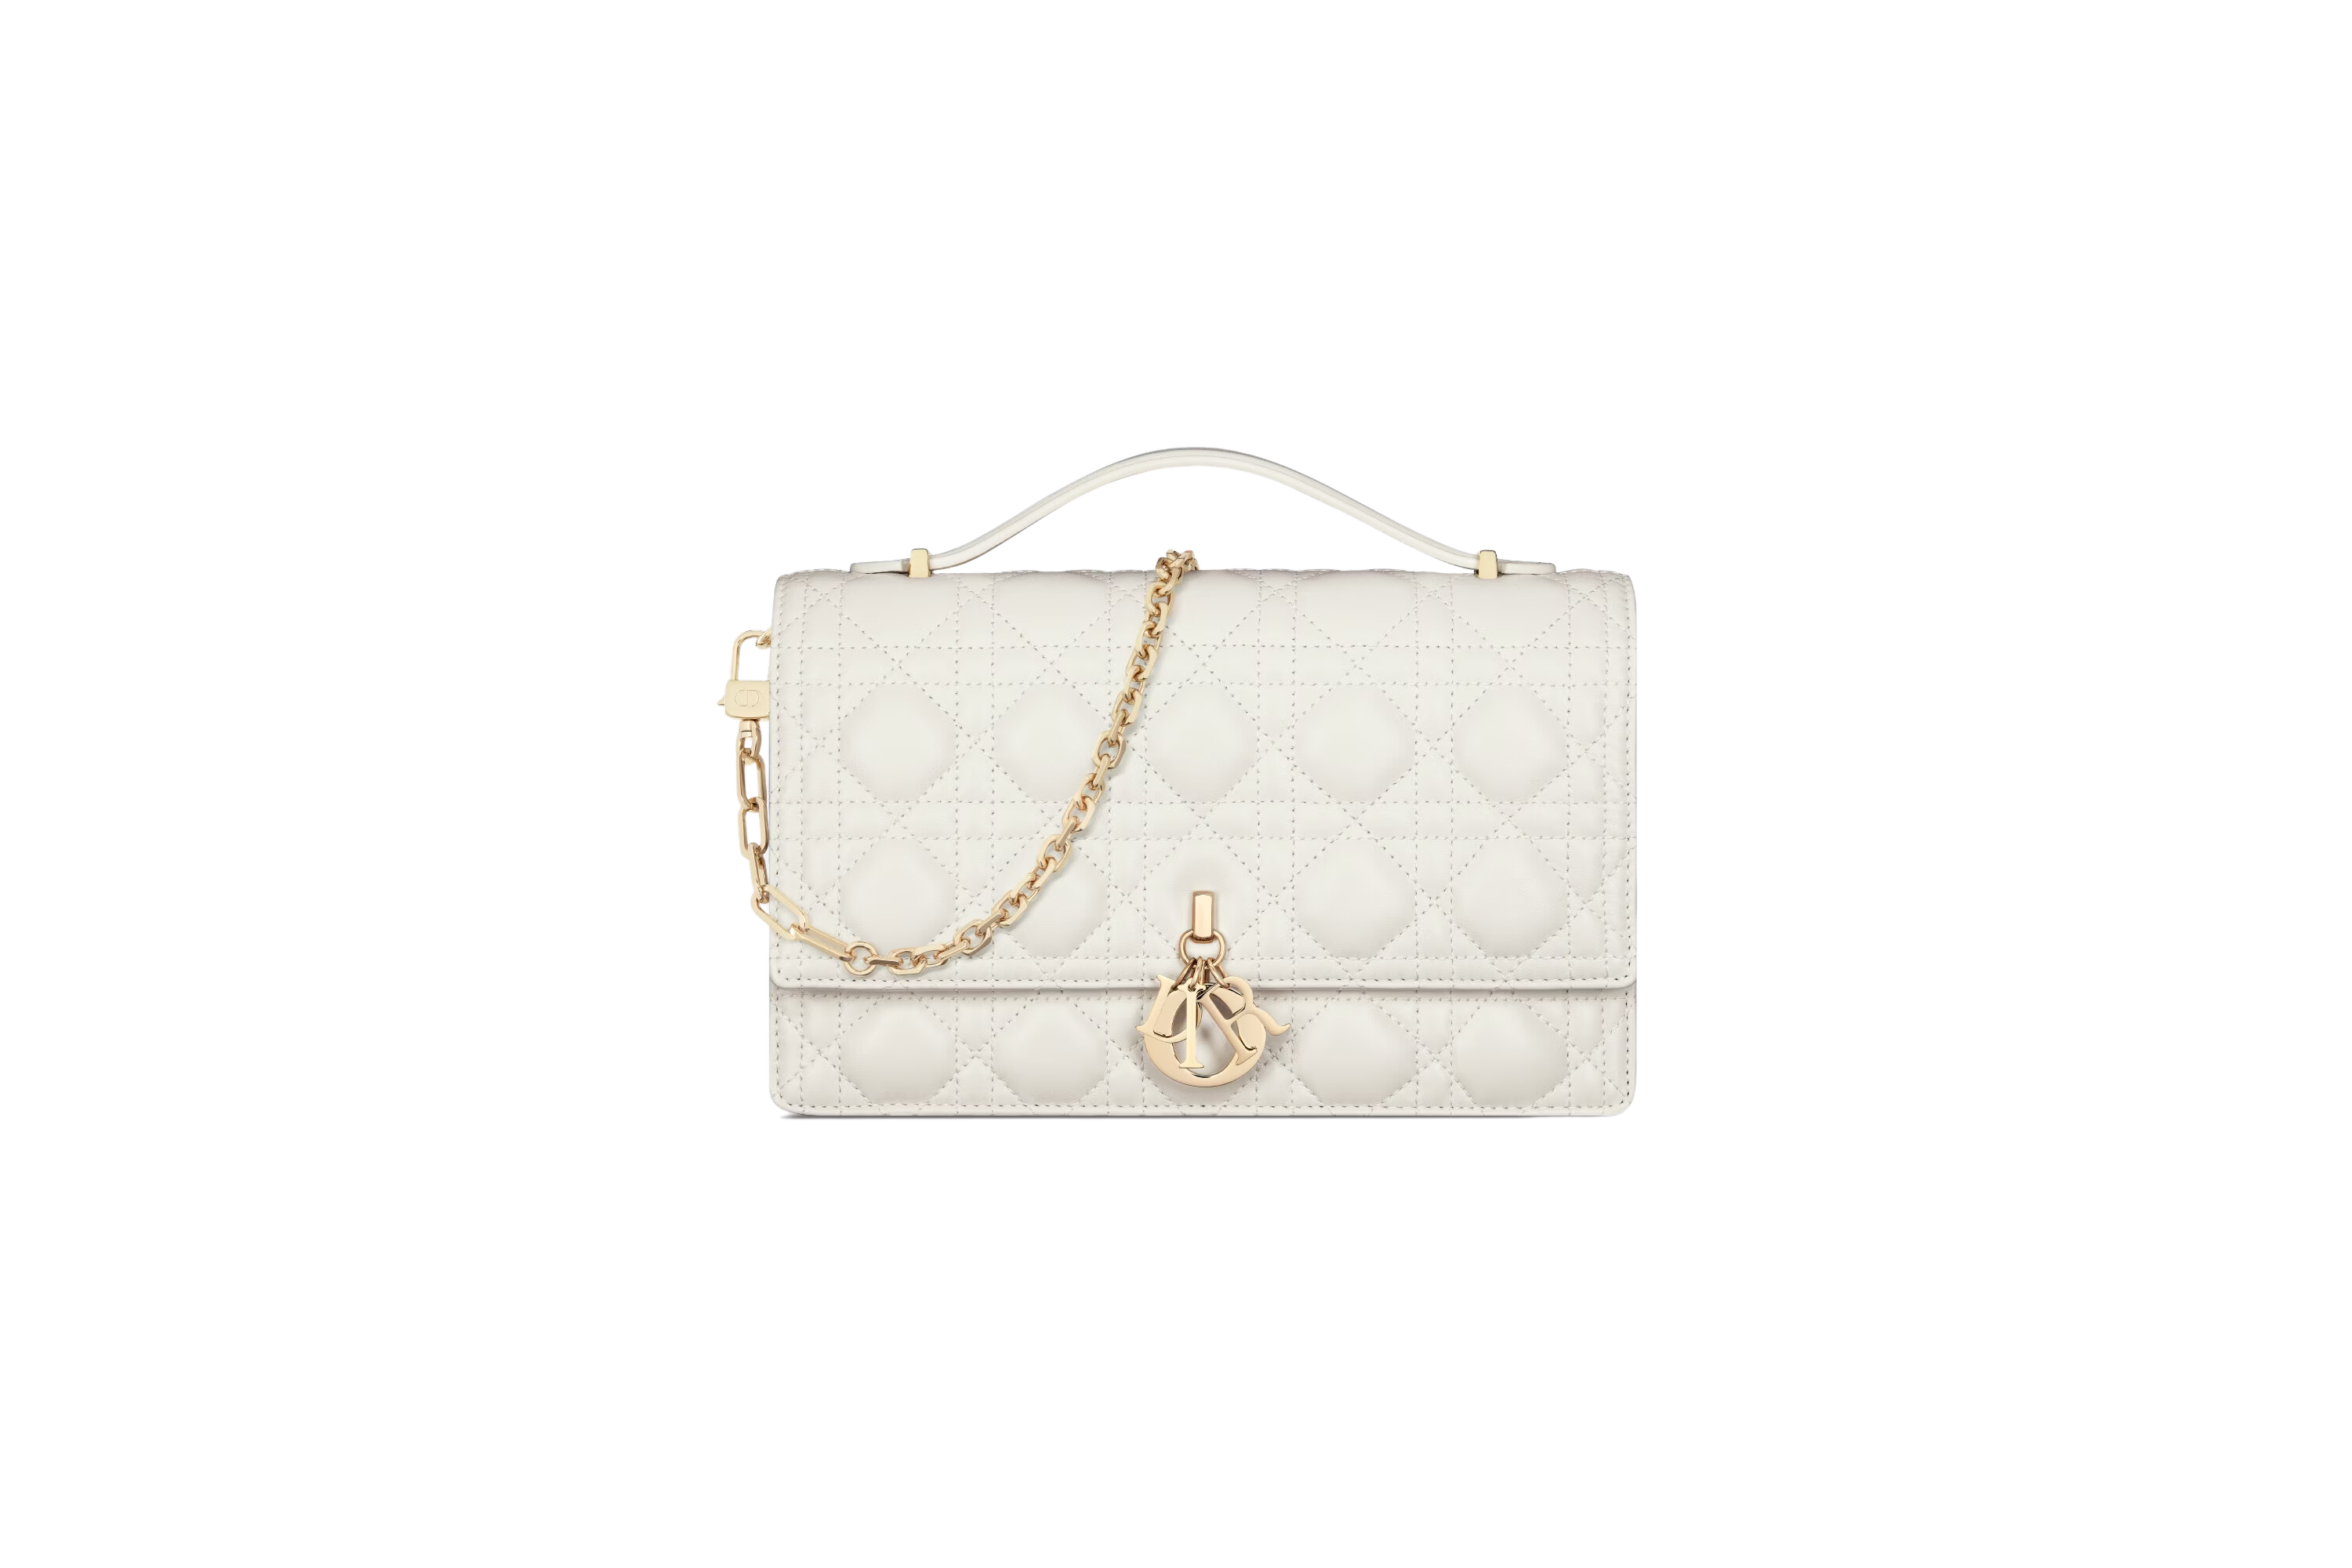 MISS DIOR TOP HANDLE BAG Latte Cannage Lambskin